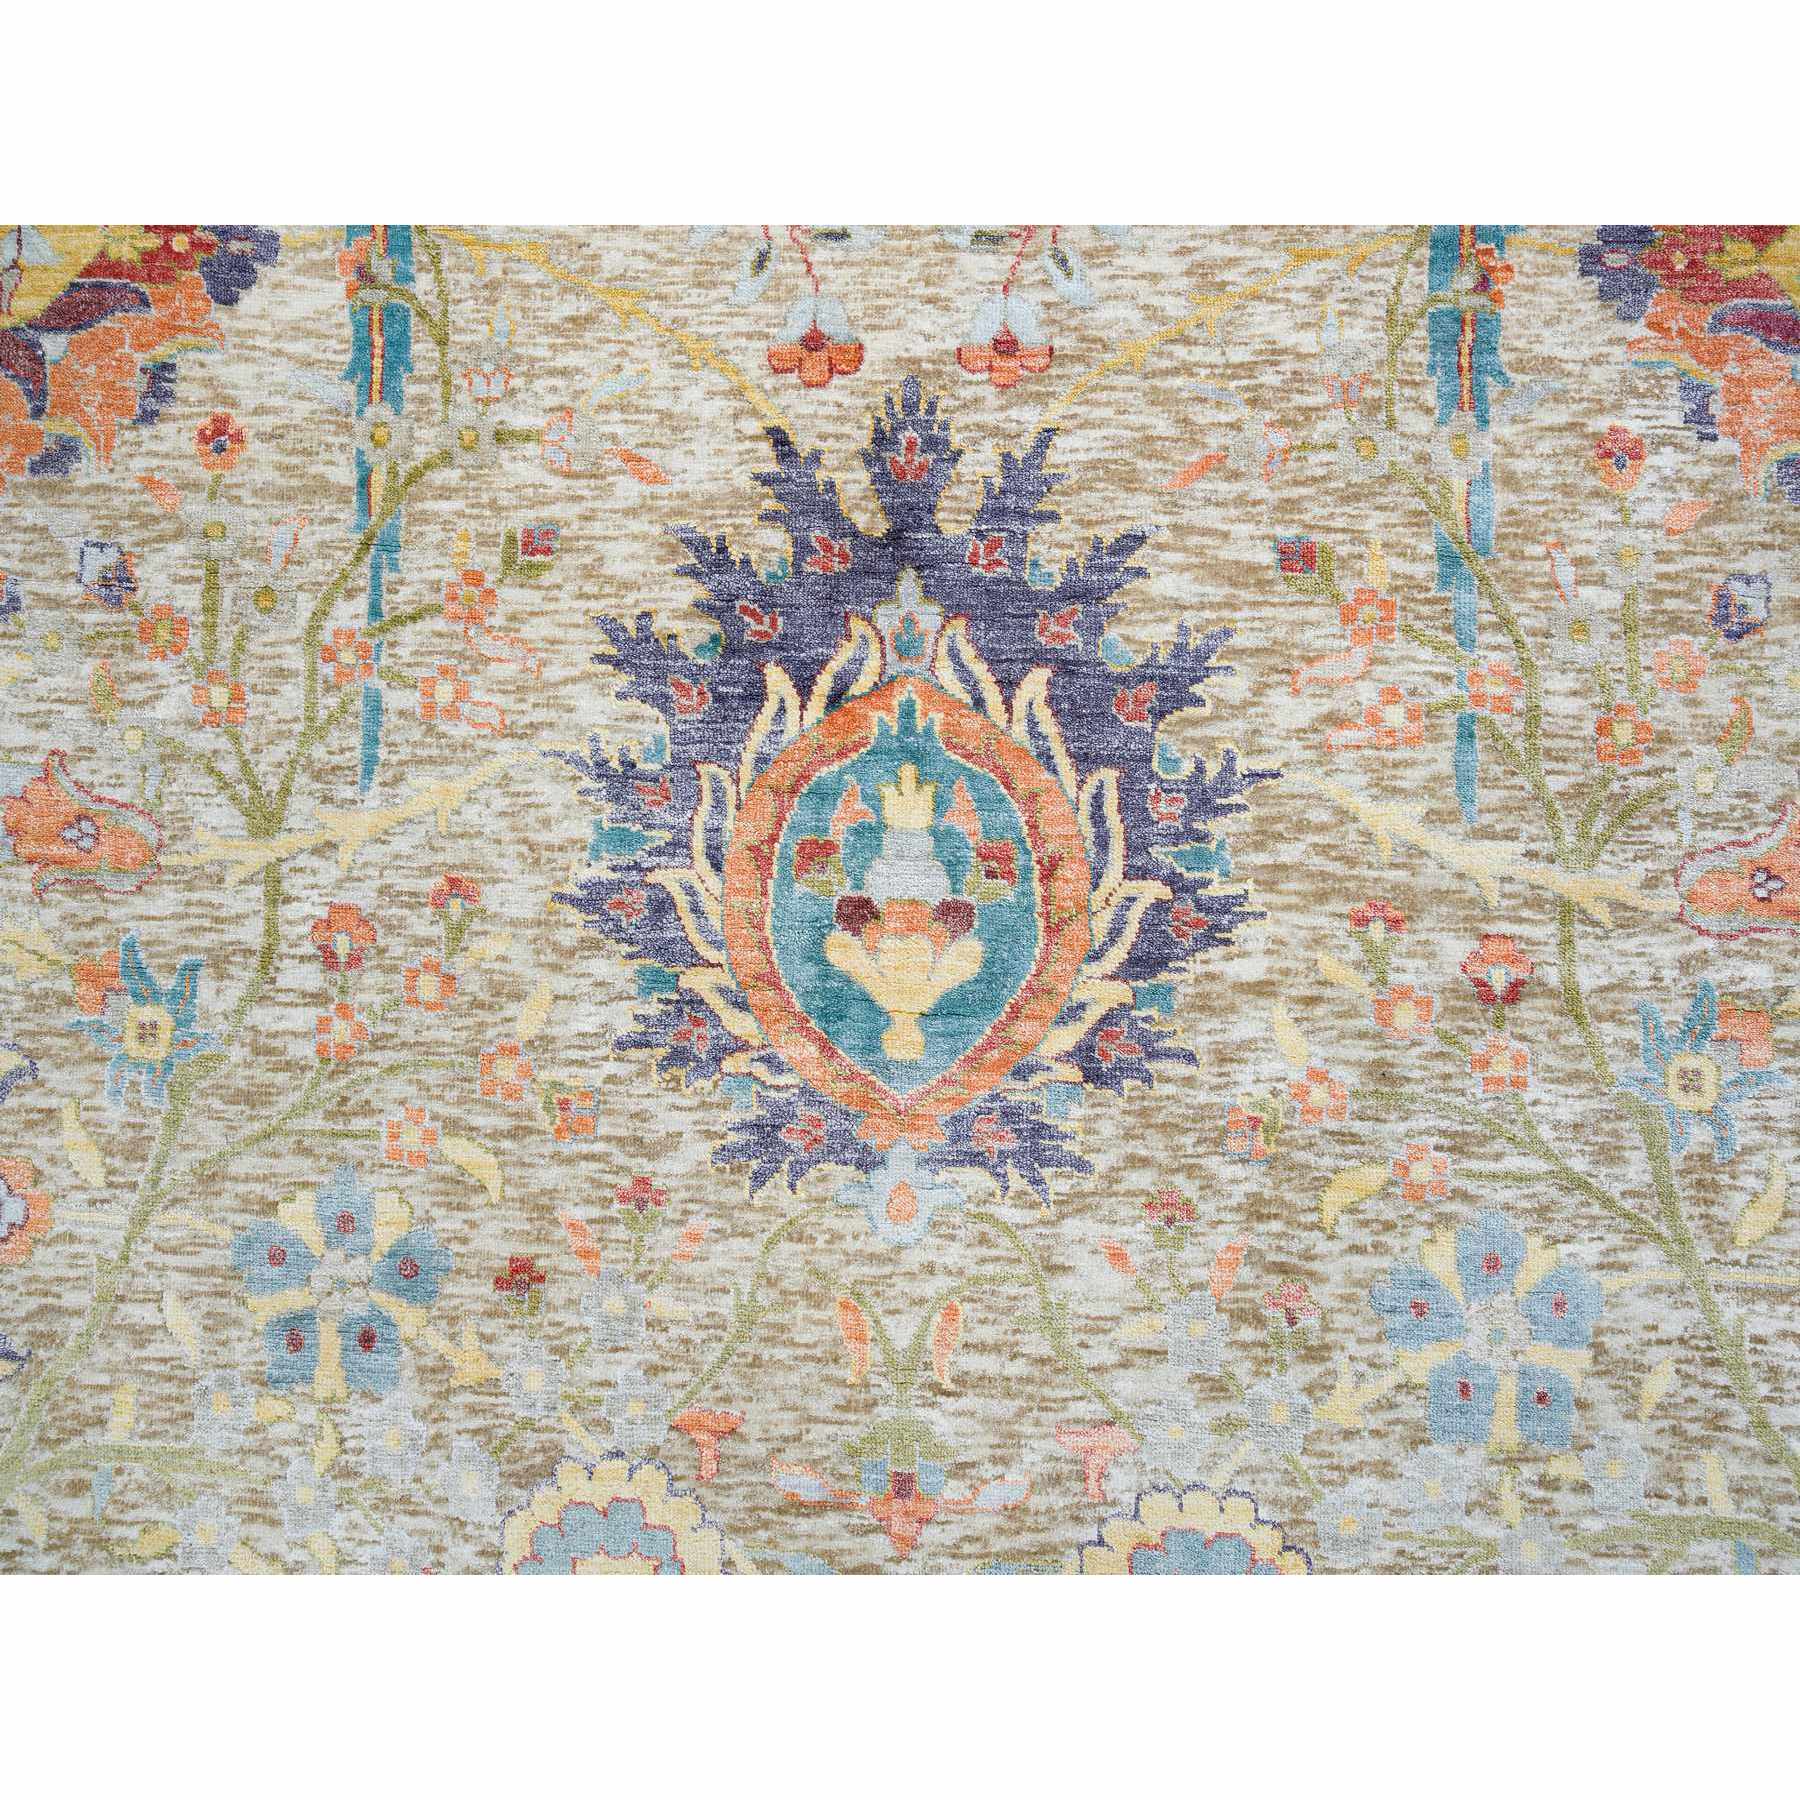  Silk Hand-Knotted Area Rug 10'3